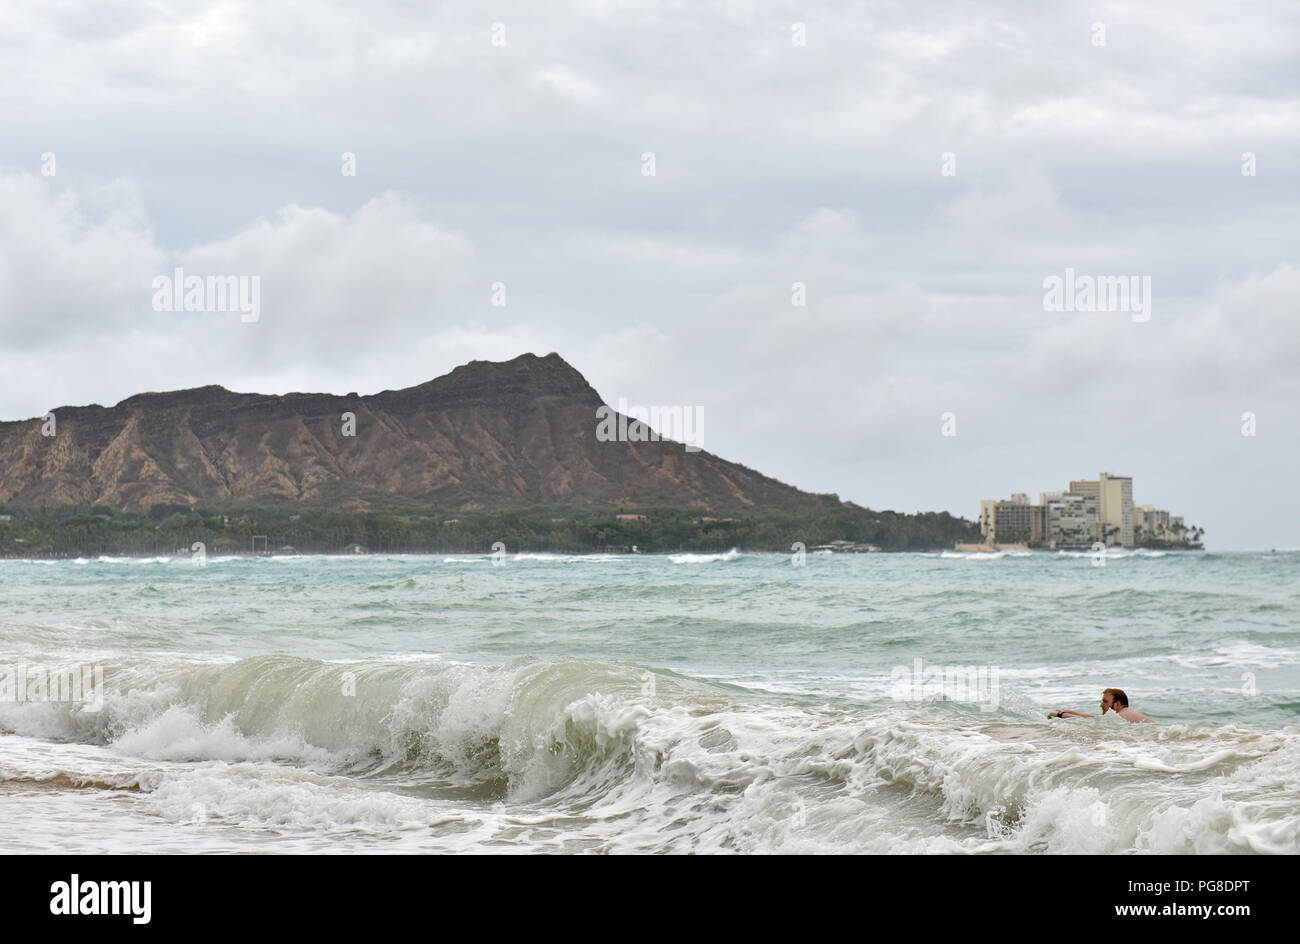 Honolulu, USA. 23rd Aug, 2018. A man surfs in the ocean at Waikiki beach in Honolulu of Hawaii, the United States, Aug. 23, 2018. Hurricane Lane, predicted as the biggest weather threat to Hawaii in decades, moved perilously close to the Aloha State Thursday morning, triggering heavy rain, landslide and flooding. Credit: Sun Ruibo/Xinhua/Alamy Live News Stock Photo